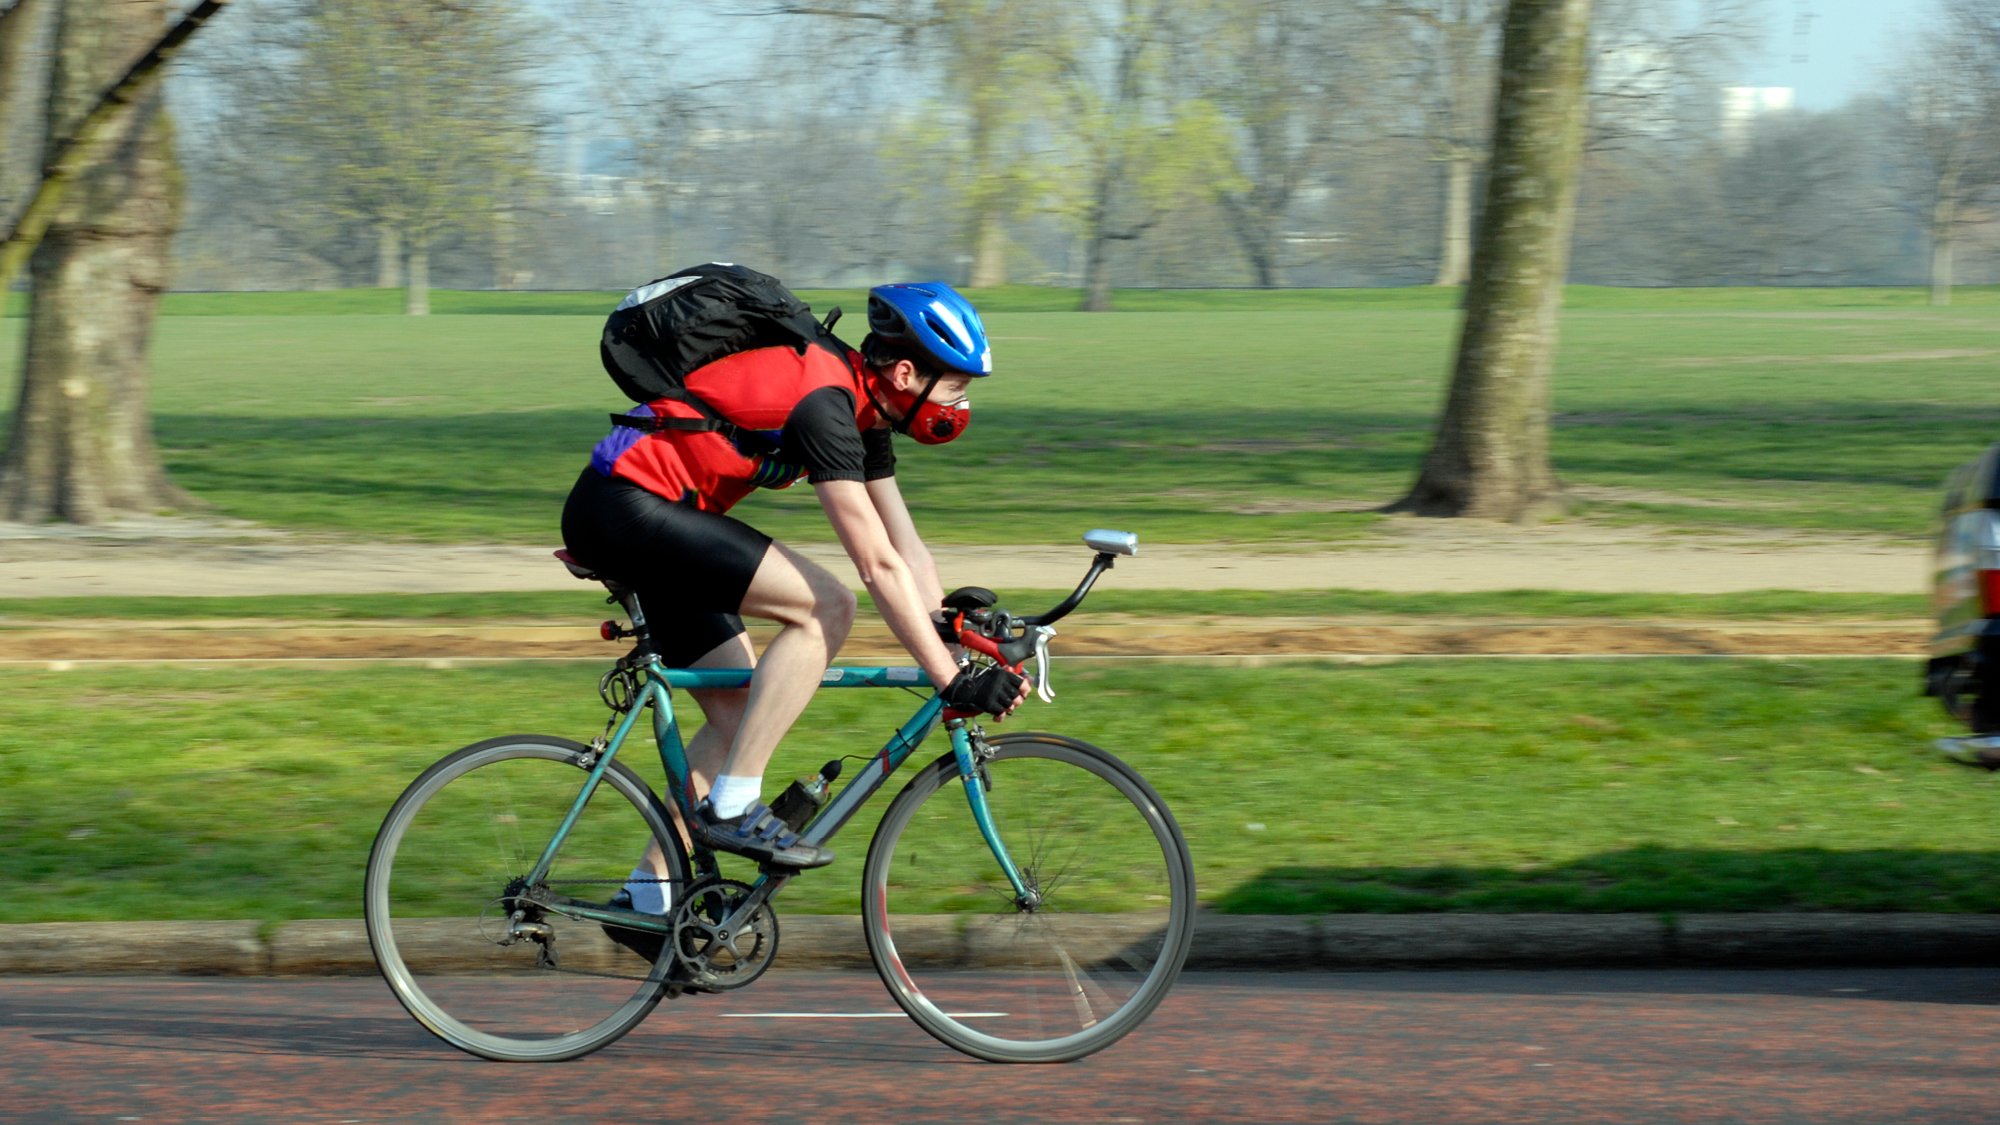 A man riding a bike in traffic in front of a green park